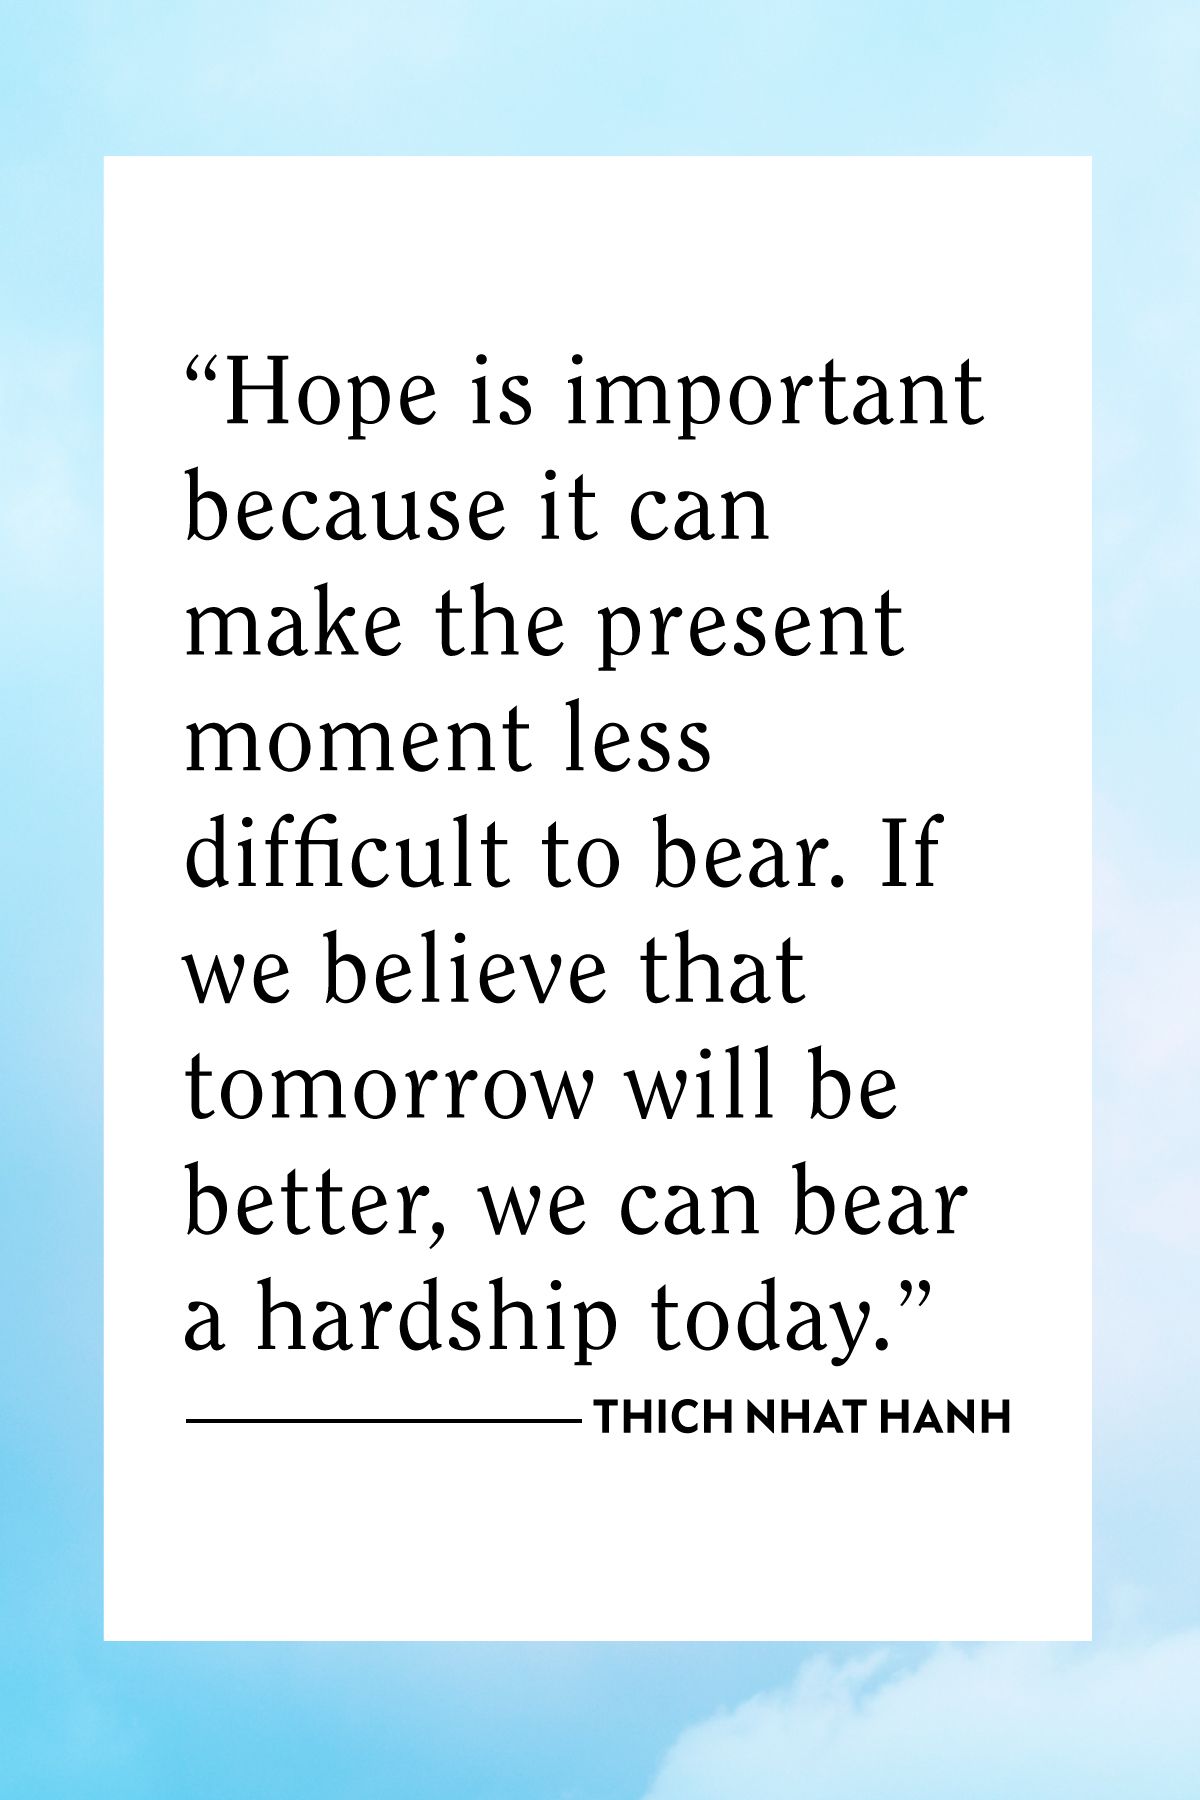 Thich Nhat Hanh Quotes On Hope - Gerta Juliana